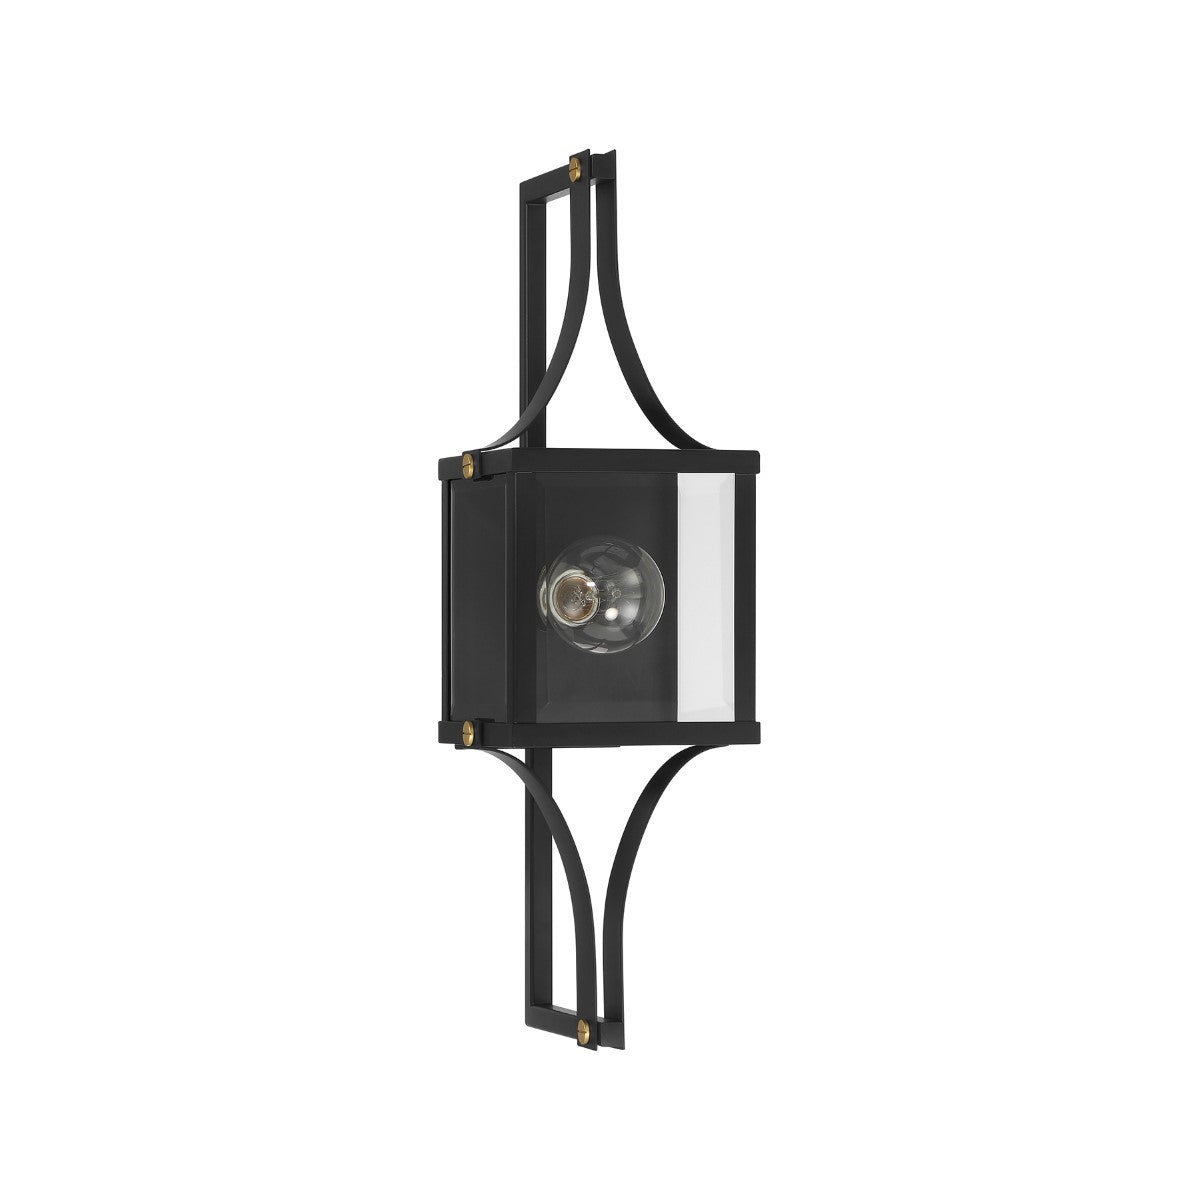 Raeburn 23 in. Outdoor Wall Lantern Matte Black and Weathered Brushed Brass Finish - Bees Lighting